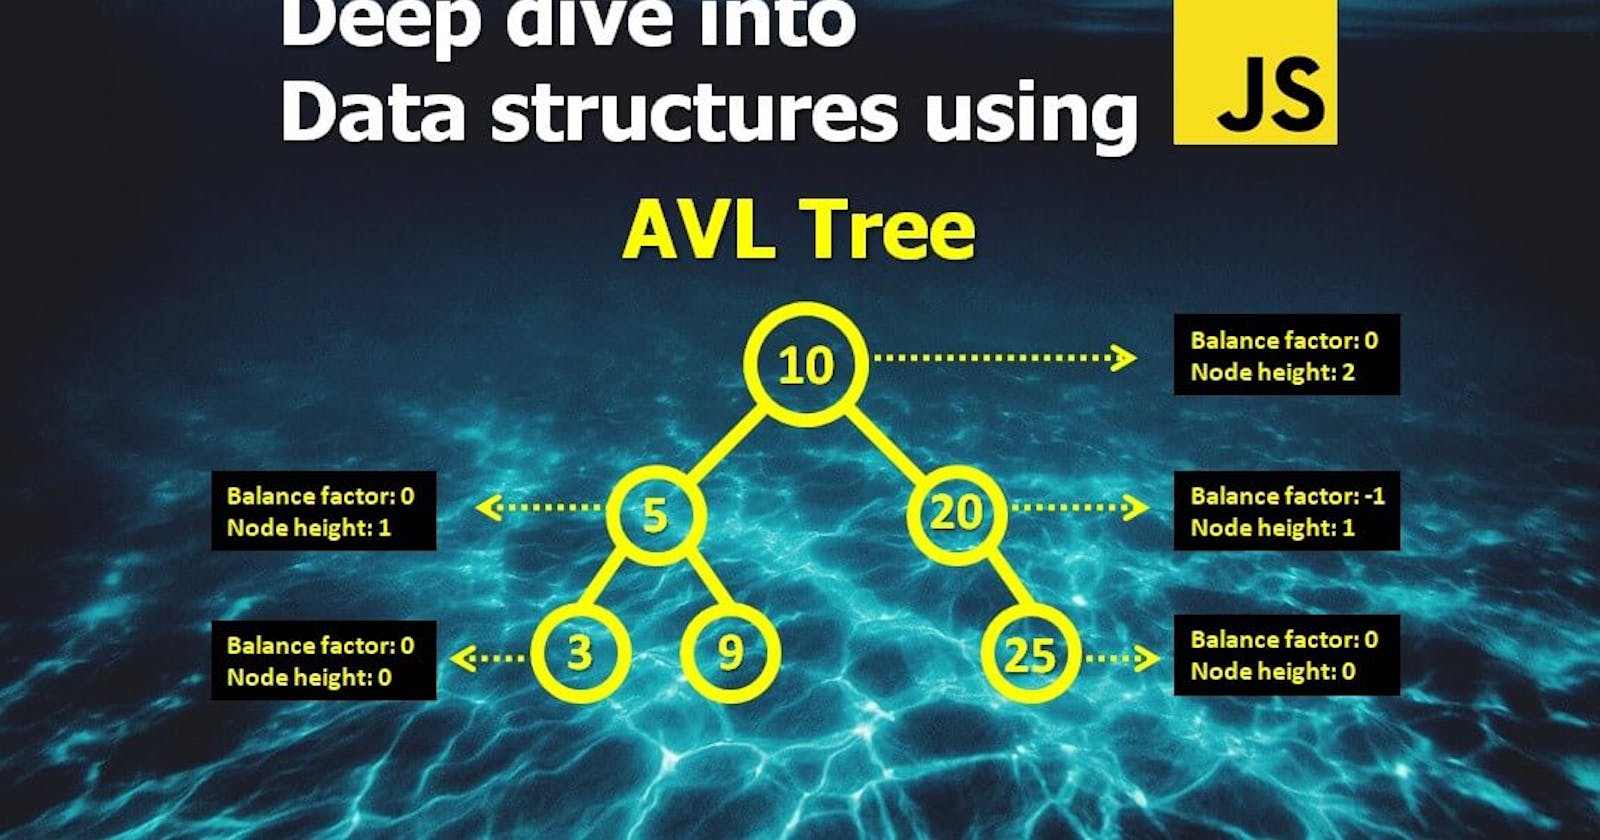 Deep Dive into Data structures using Javascript - AVL Tree